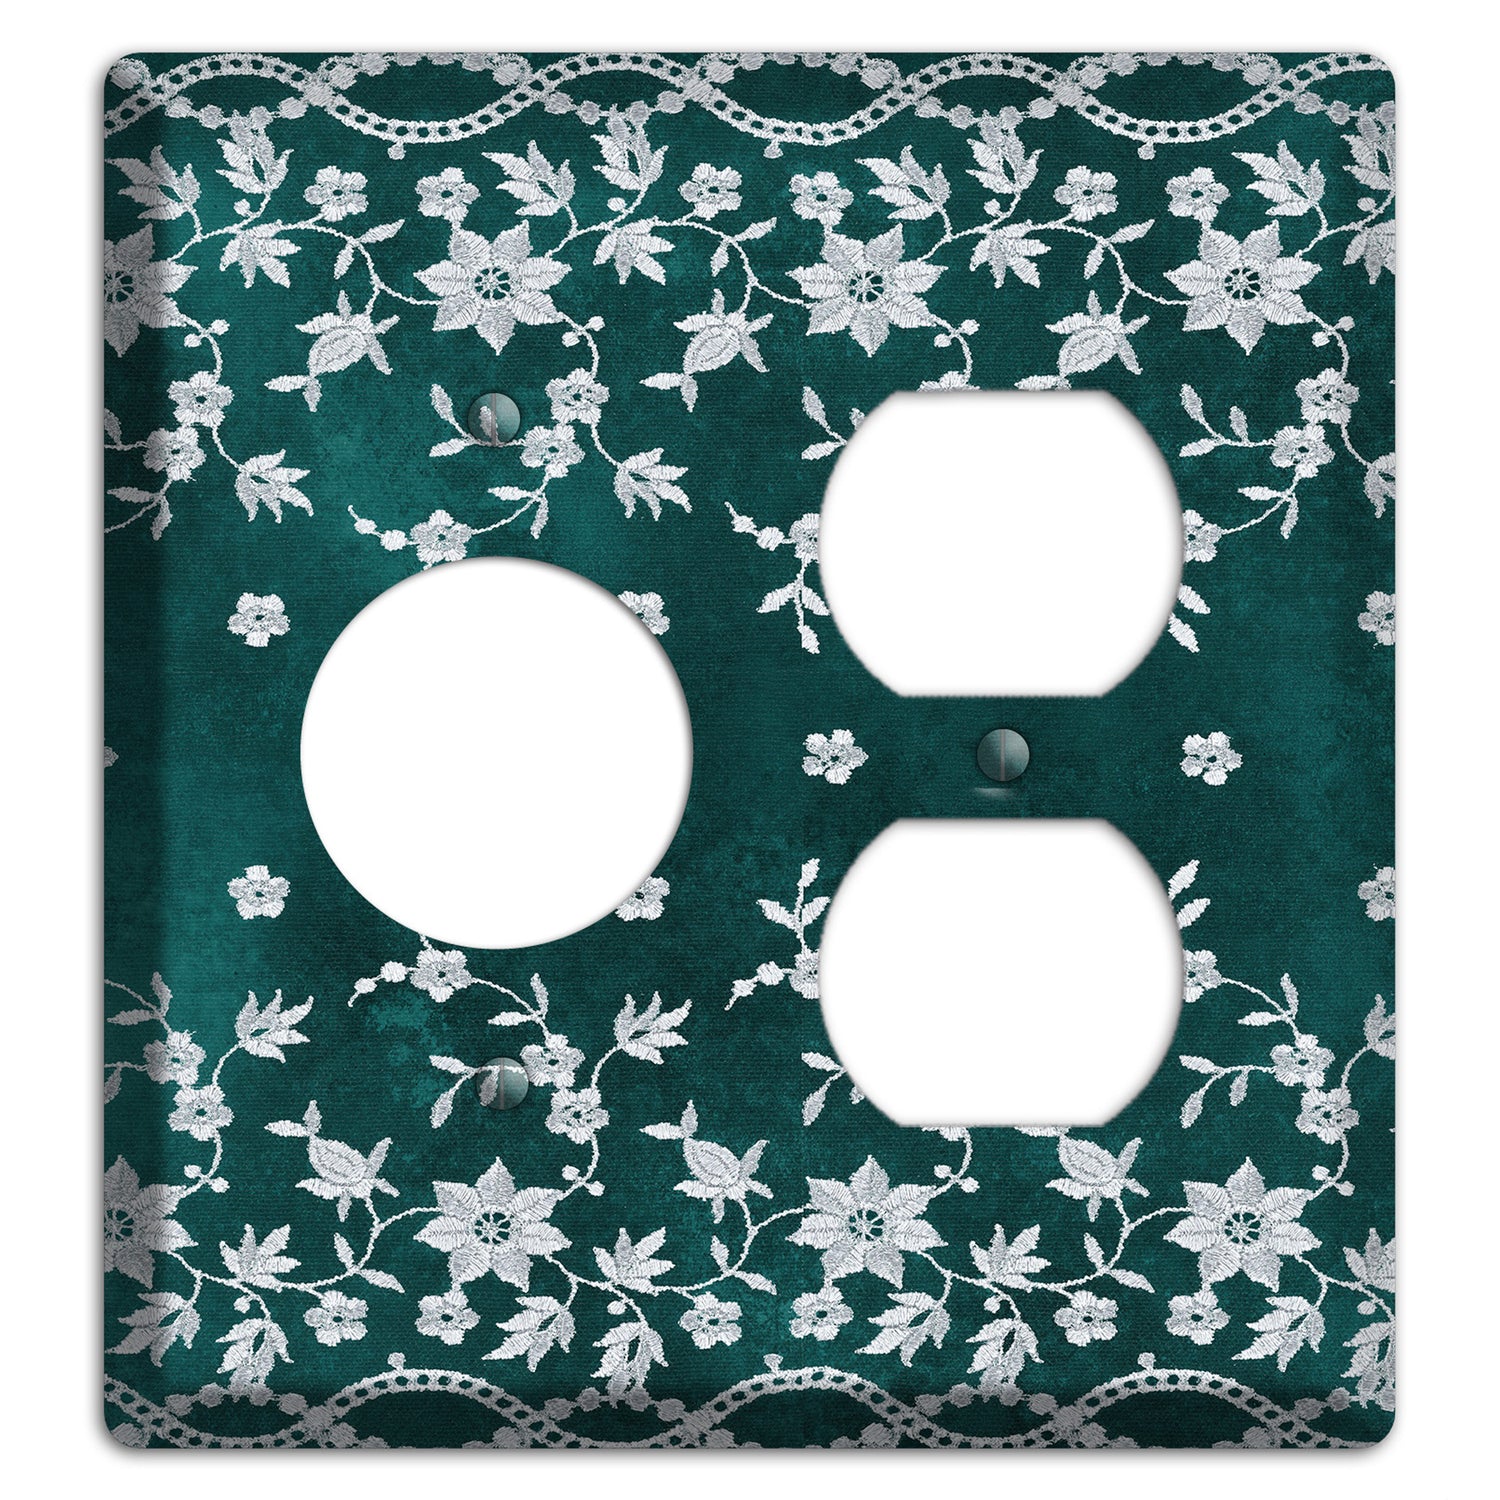 Embroidered Floral Teal Receptacle / Duplex Wallplate